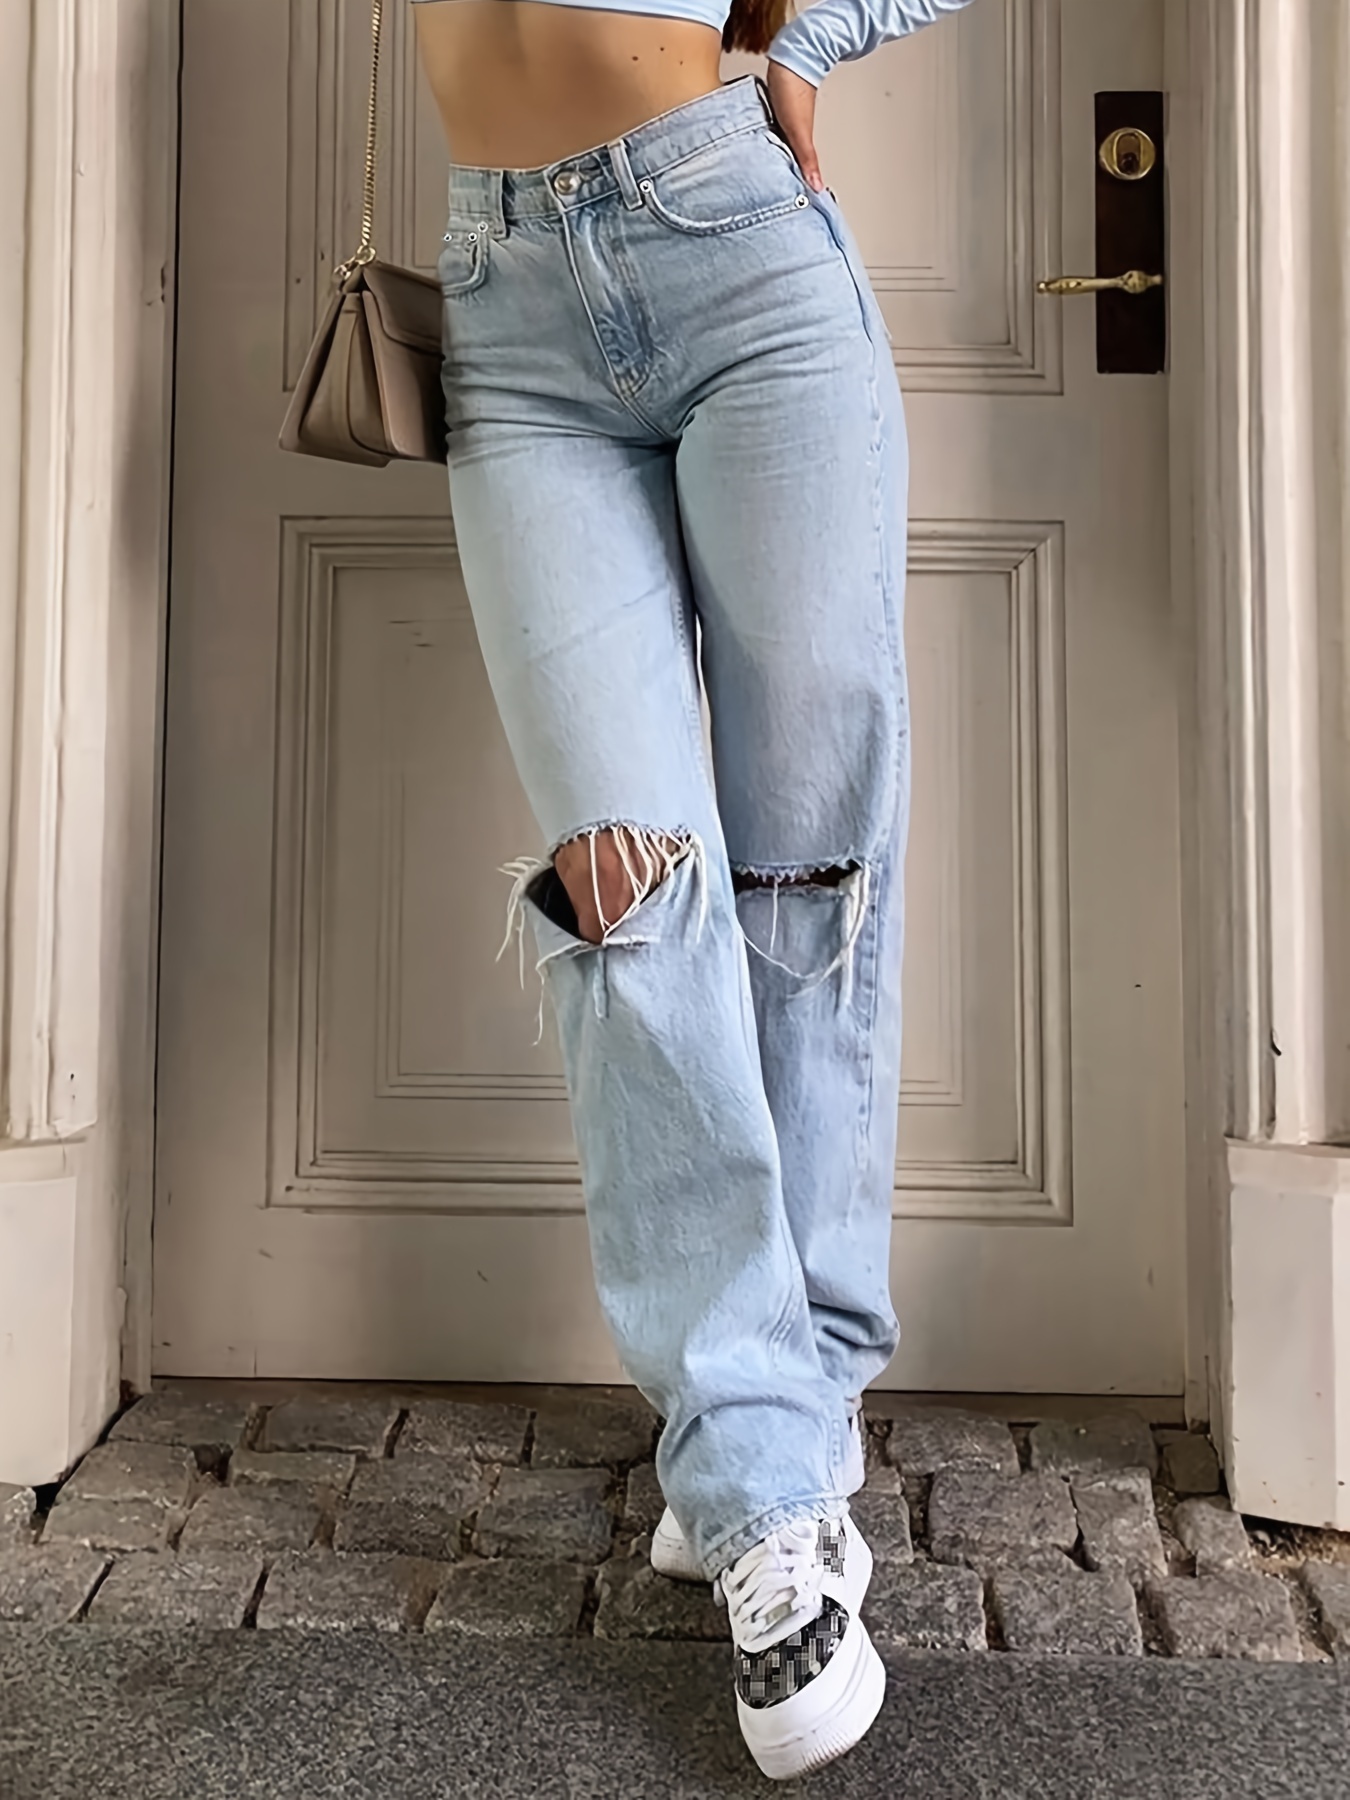 Women Hole Long Denim Regular Ripped Sexy Slim Gradient Washed Jeans Pants  Plus Size Pants Dress Pants for Tall